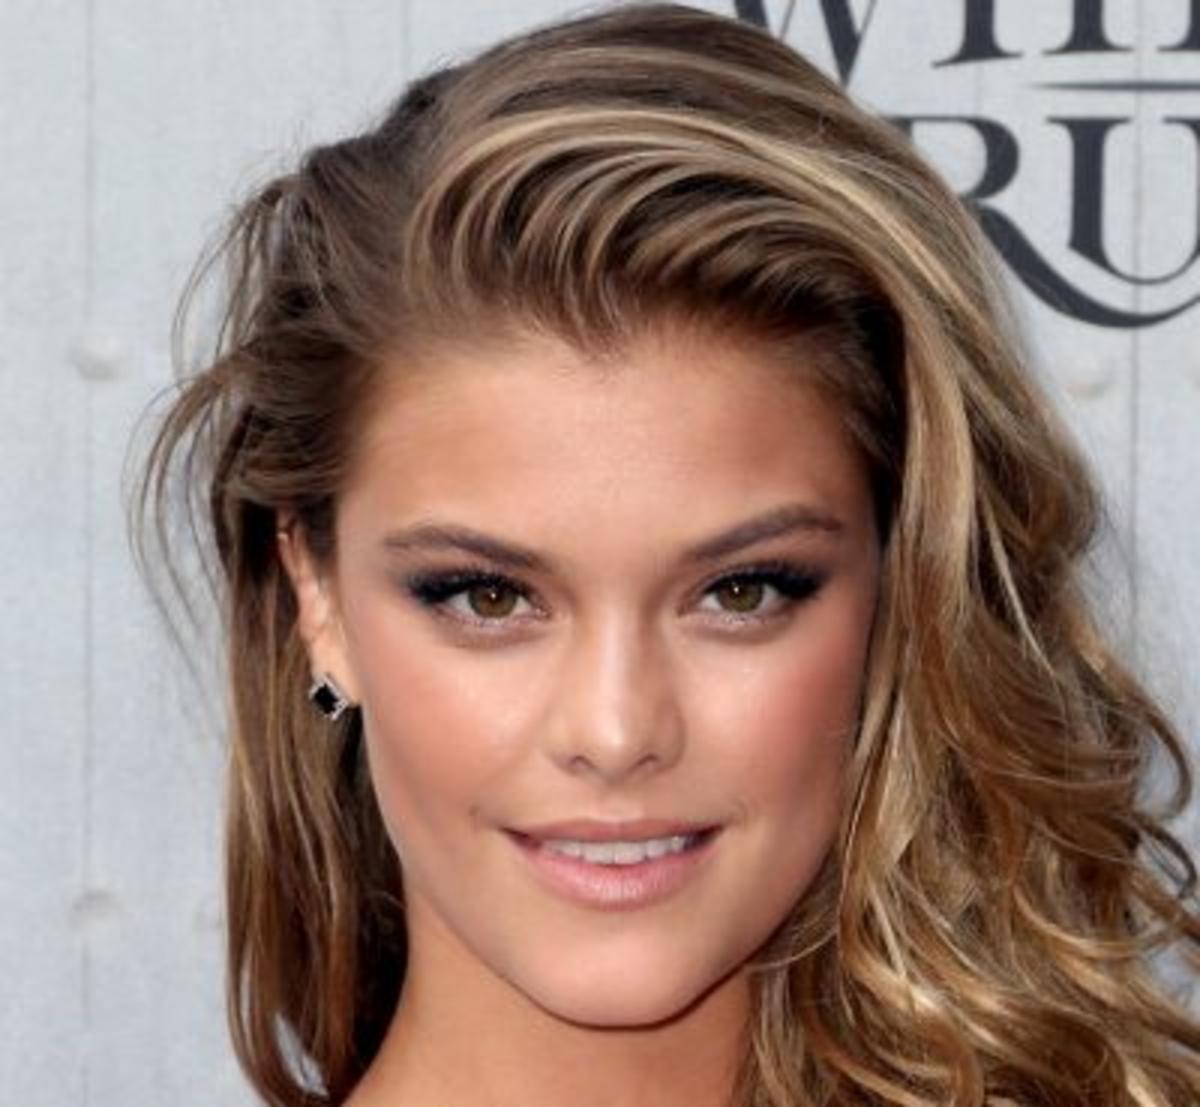 Of nina agdal pictures Ninass Images